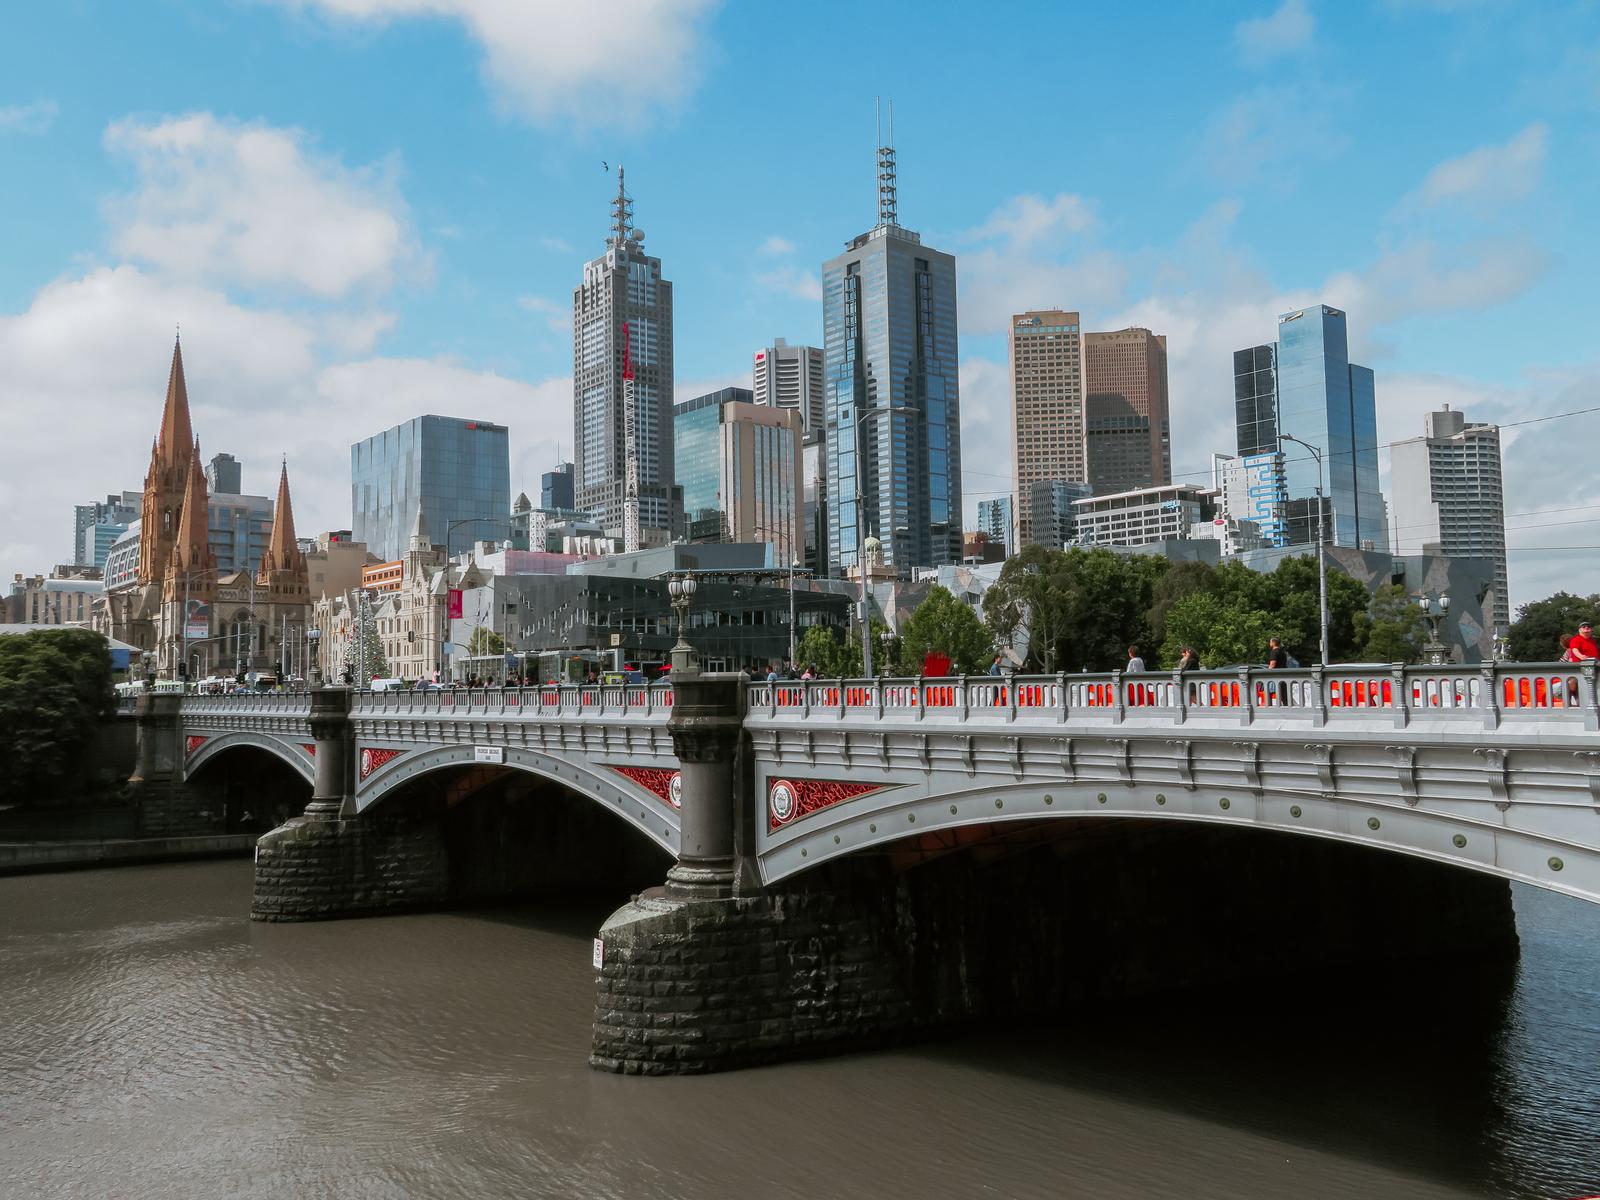 Name That City! Put Your Travel Knowledge to Test With This Picture Quiz! Melbourne, Australia